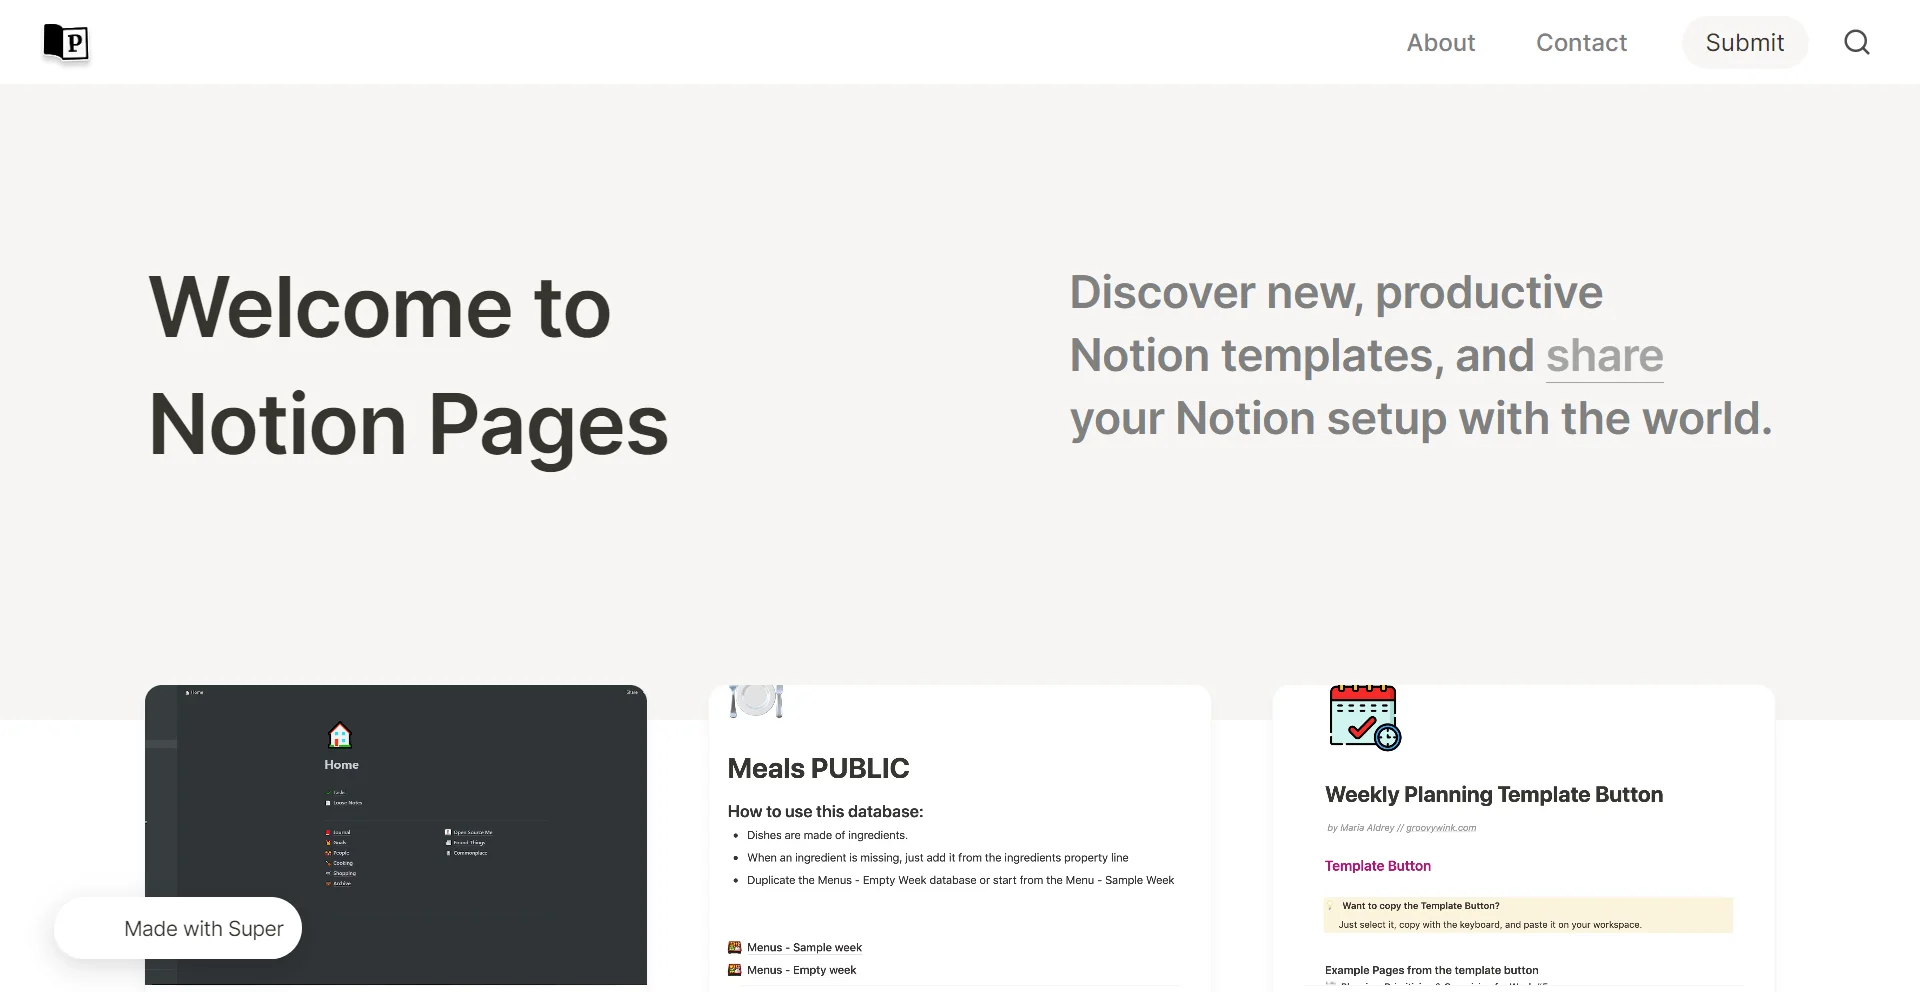 Notion Pages